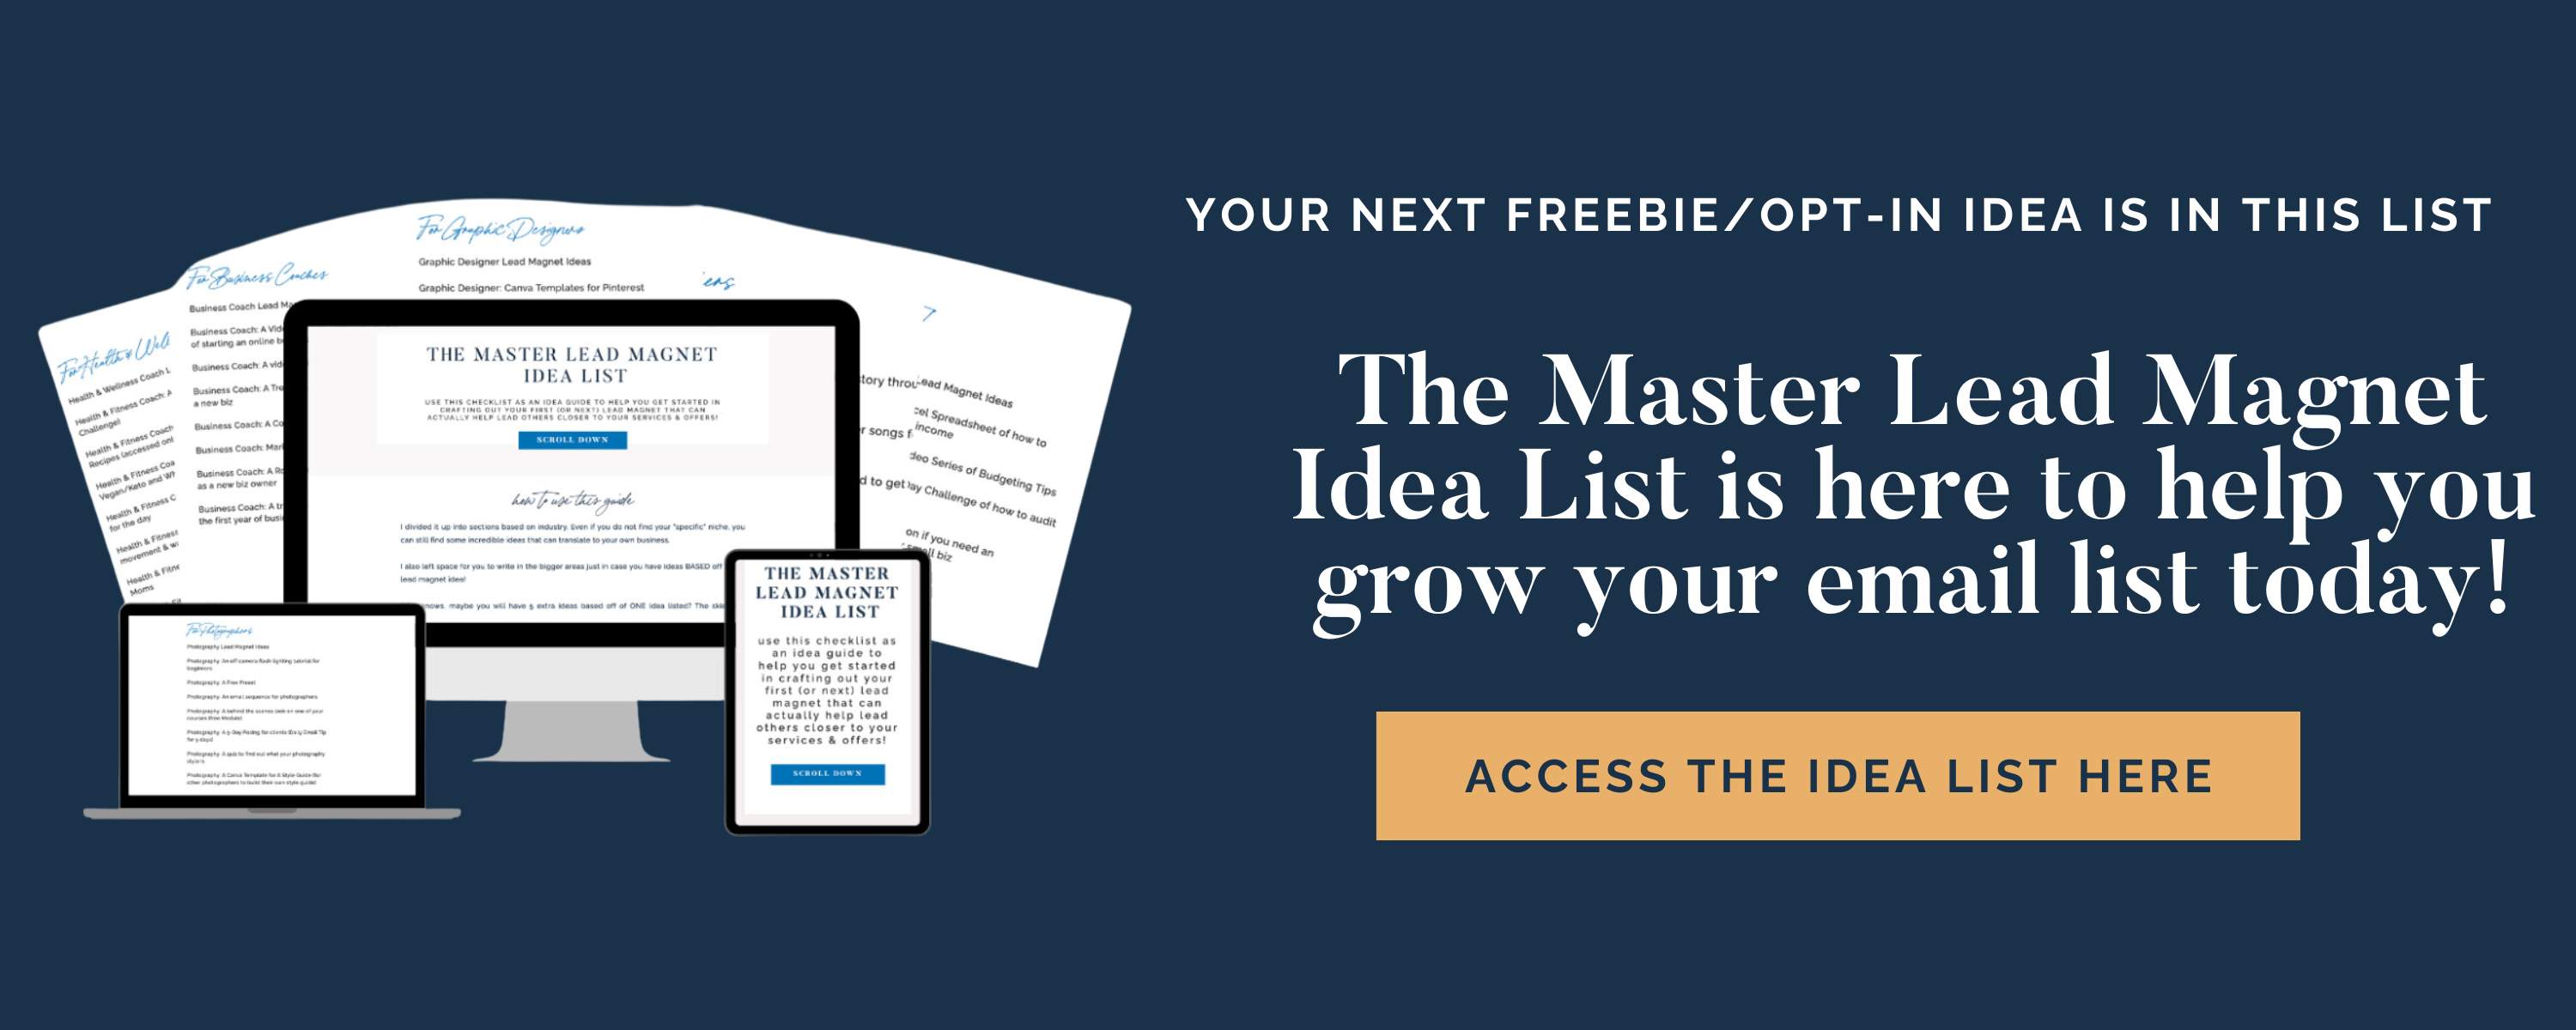 blog-banner-to-advertise-the-free-resource-the-lead-magnet-master-idea-list-to-help-you-grow-out-your-email-list